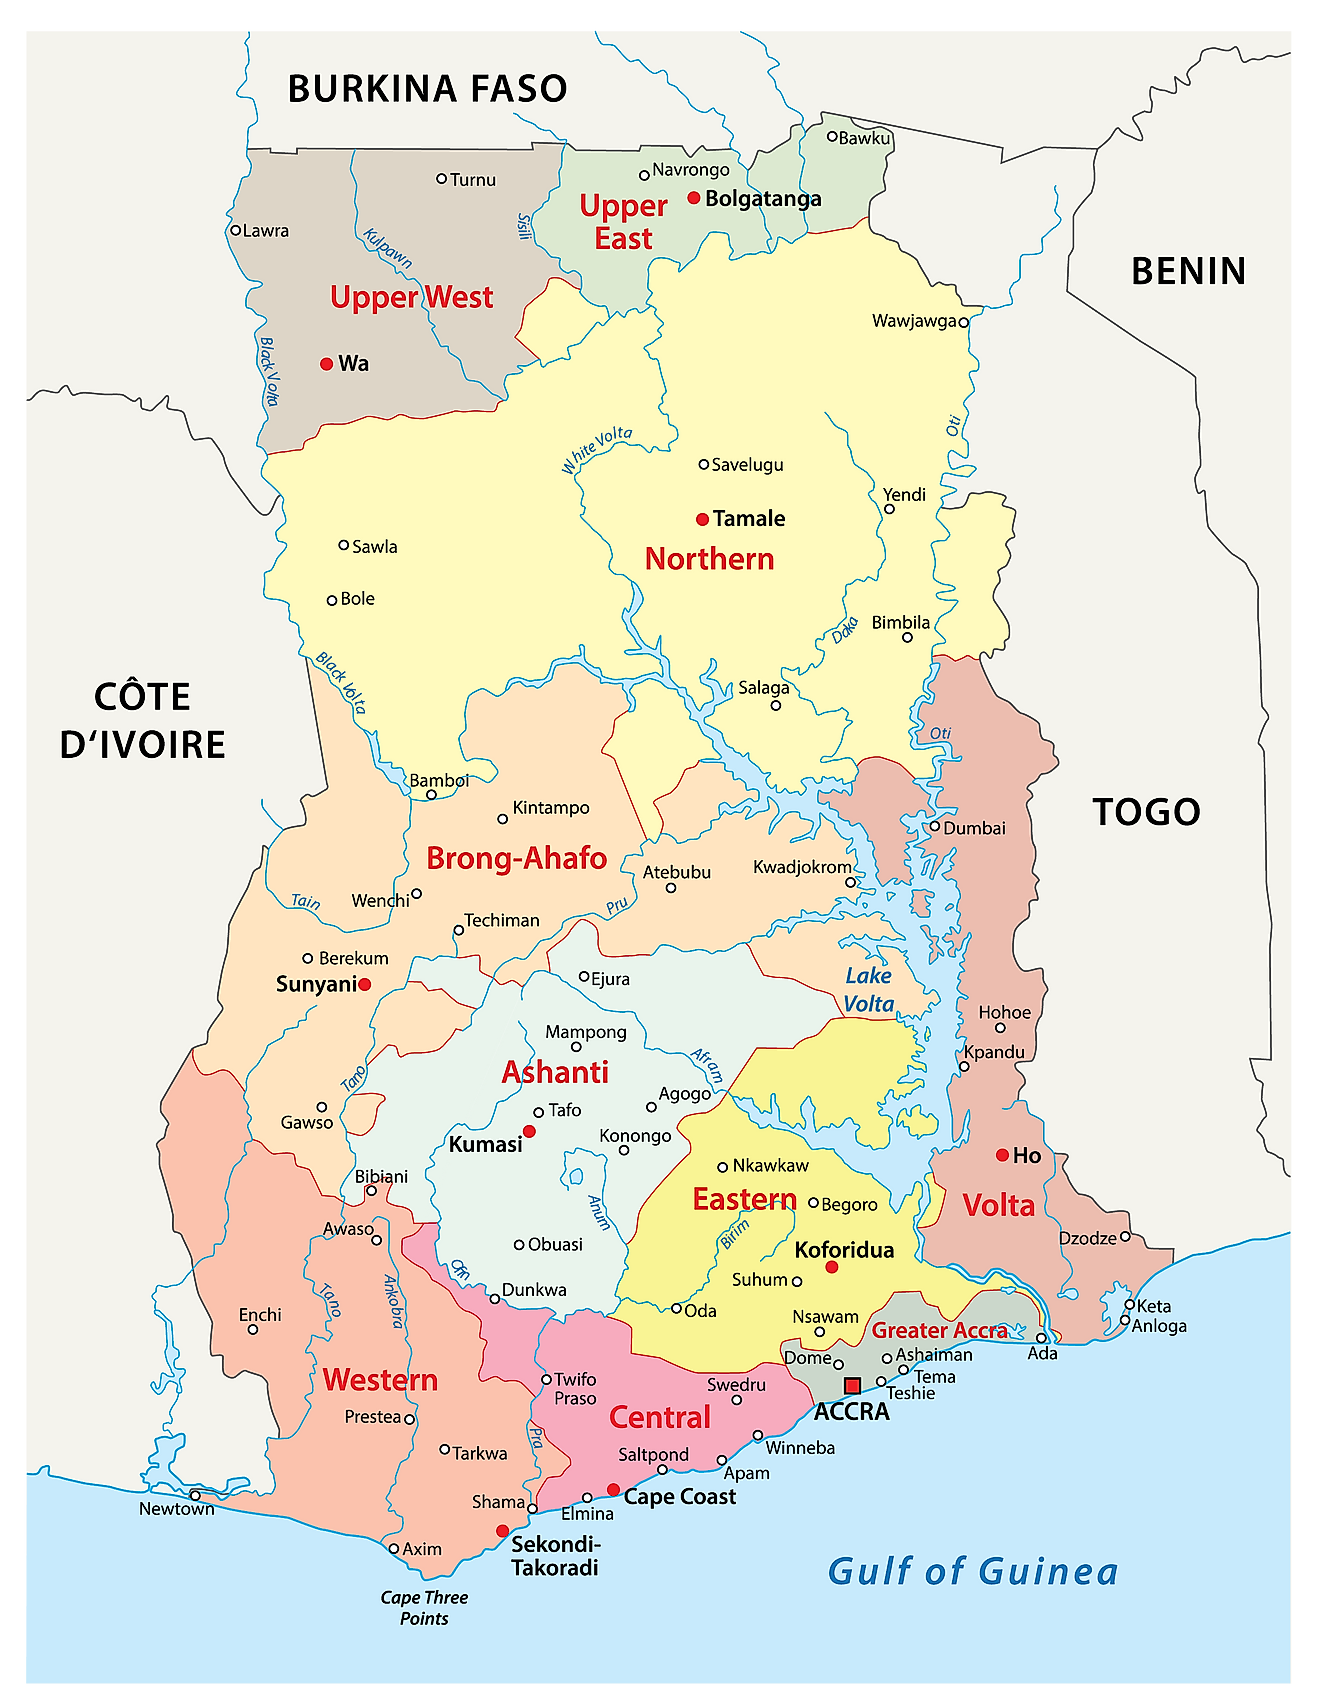 Political map of Ghana showing the 16 regions and the national capital, Accra.